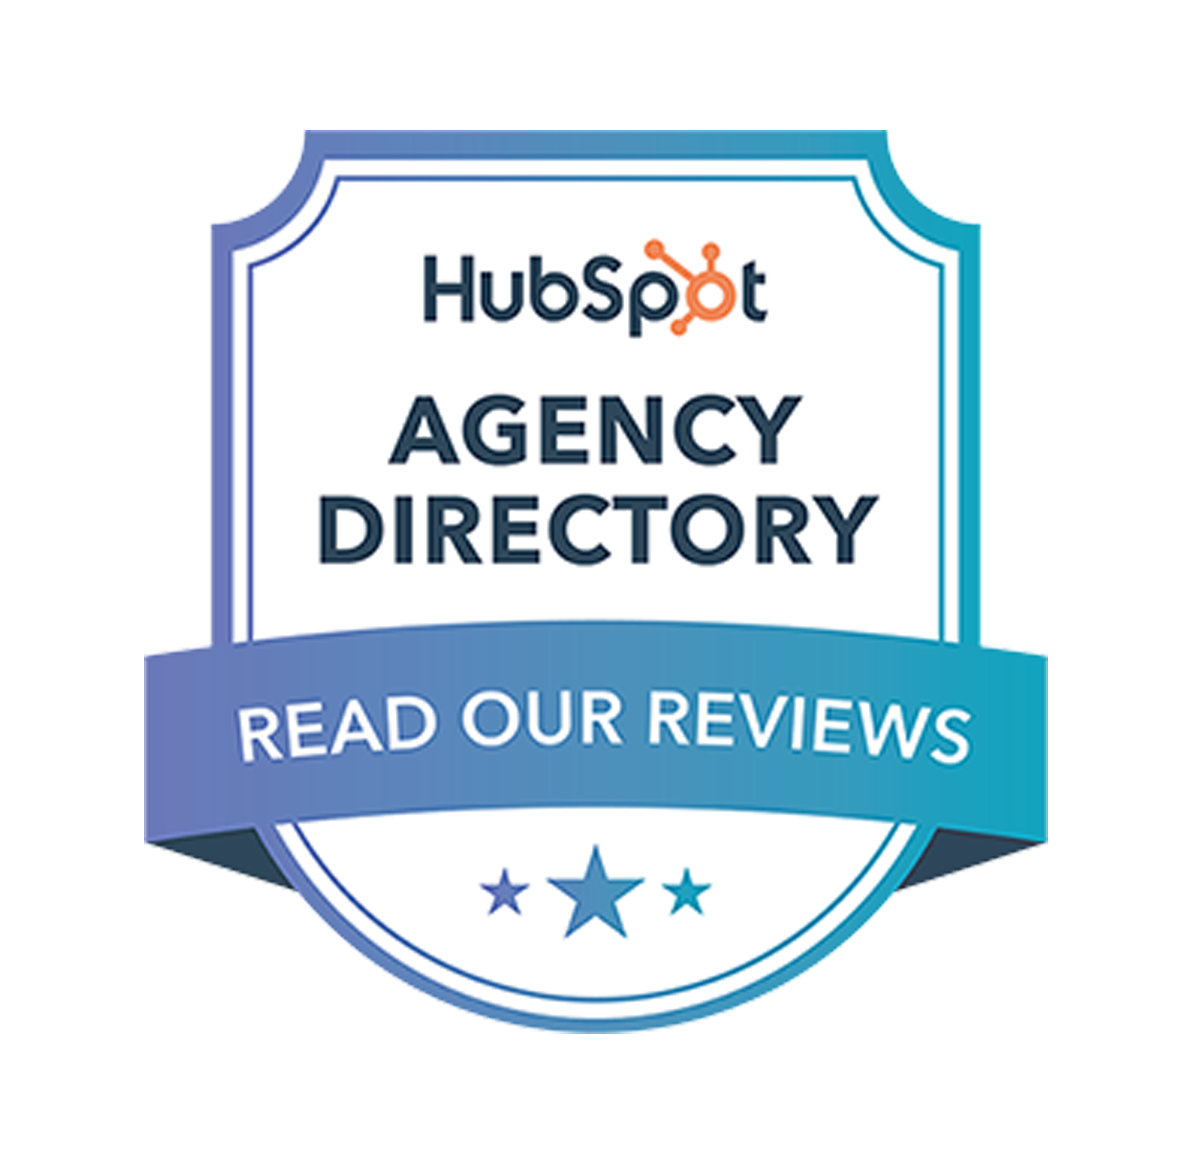 Read our Reviews on HubSpot’s Agency Directory